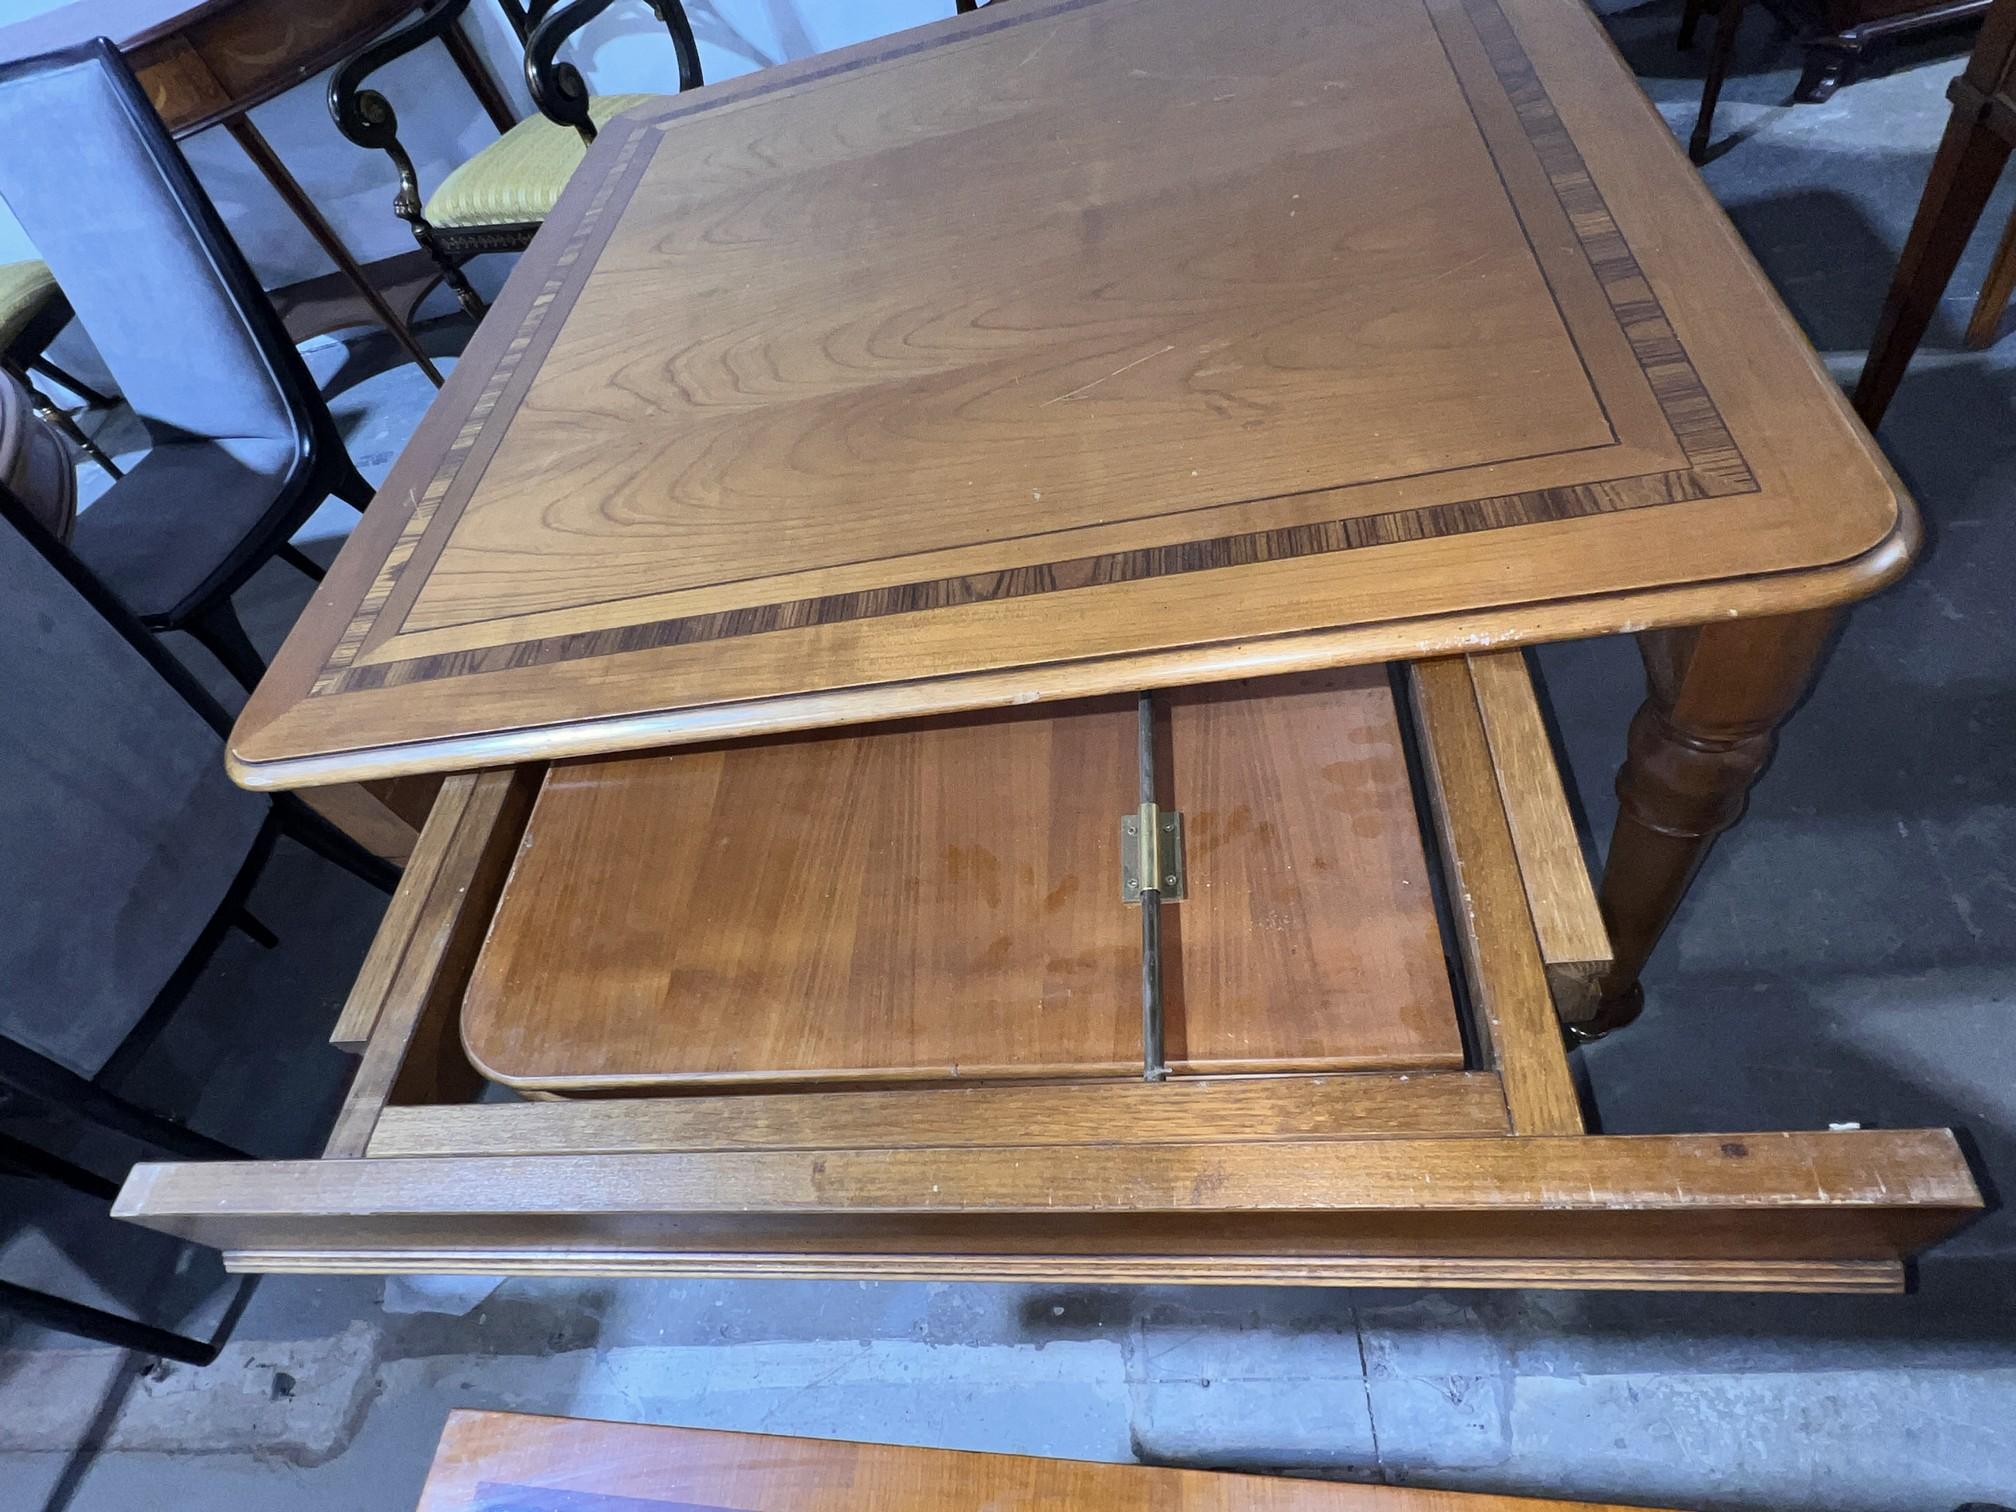 Square Dining Room Table  with 2 built in leaves - 48 x 48 in